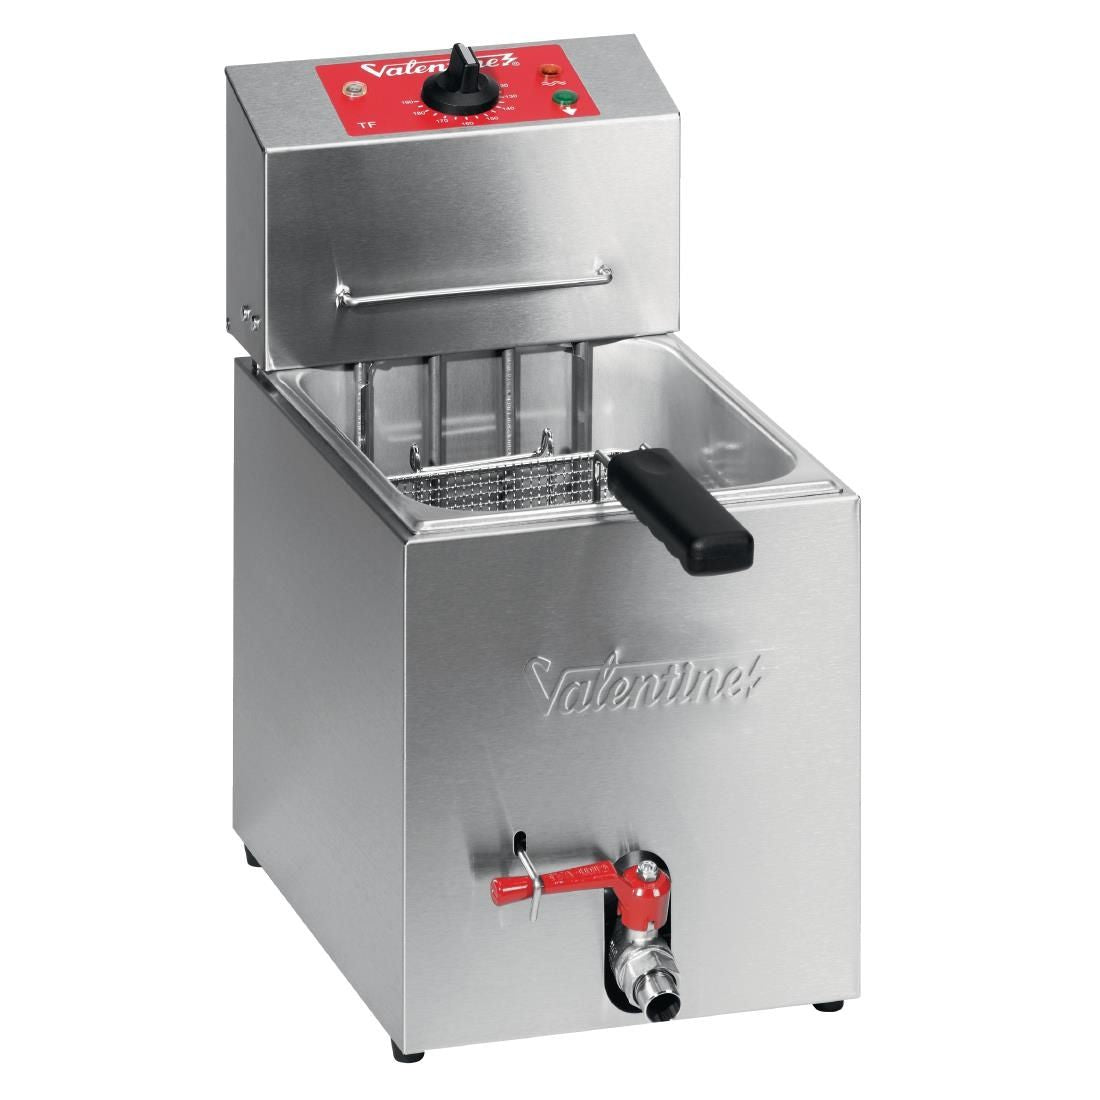 FB404 Valentine Countertop Electric Fryer 5Ltr TF5 JD Catering Equipment Solutions Ltd